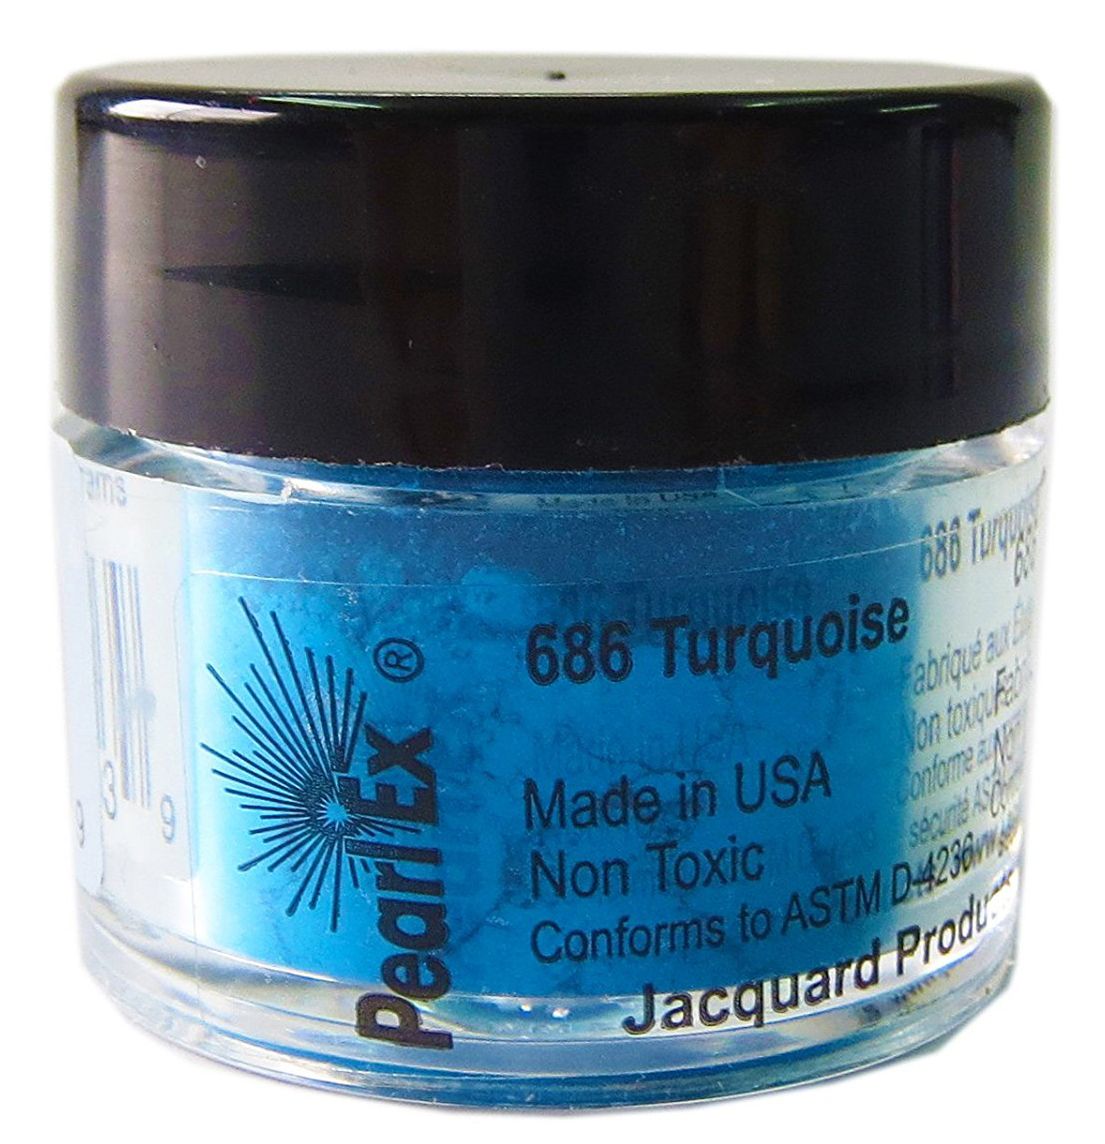 Jacquard Pearl Ex Powdered Turquoise Pigment 3g